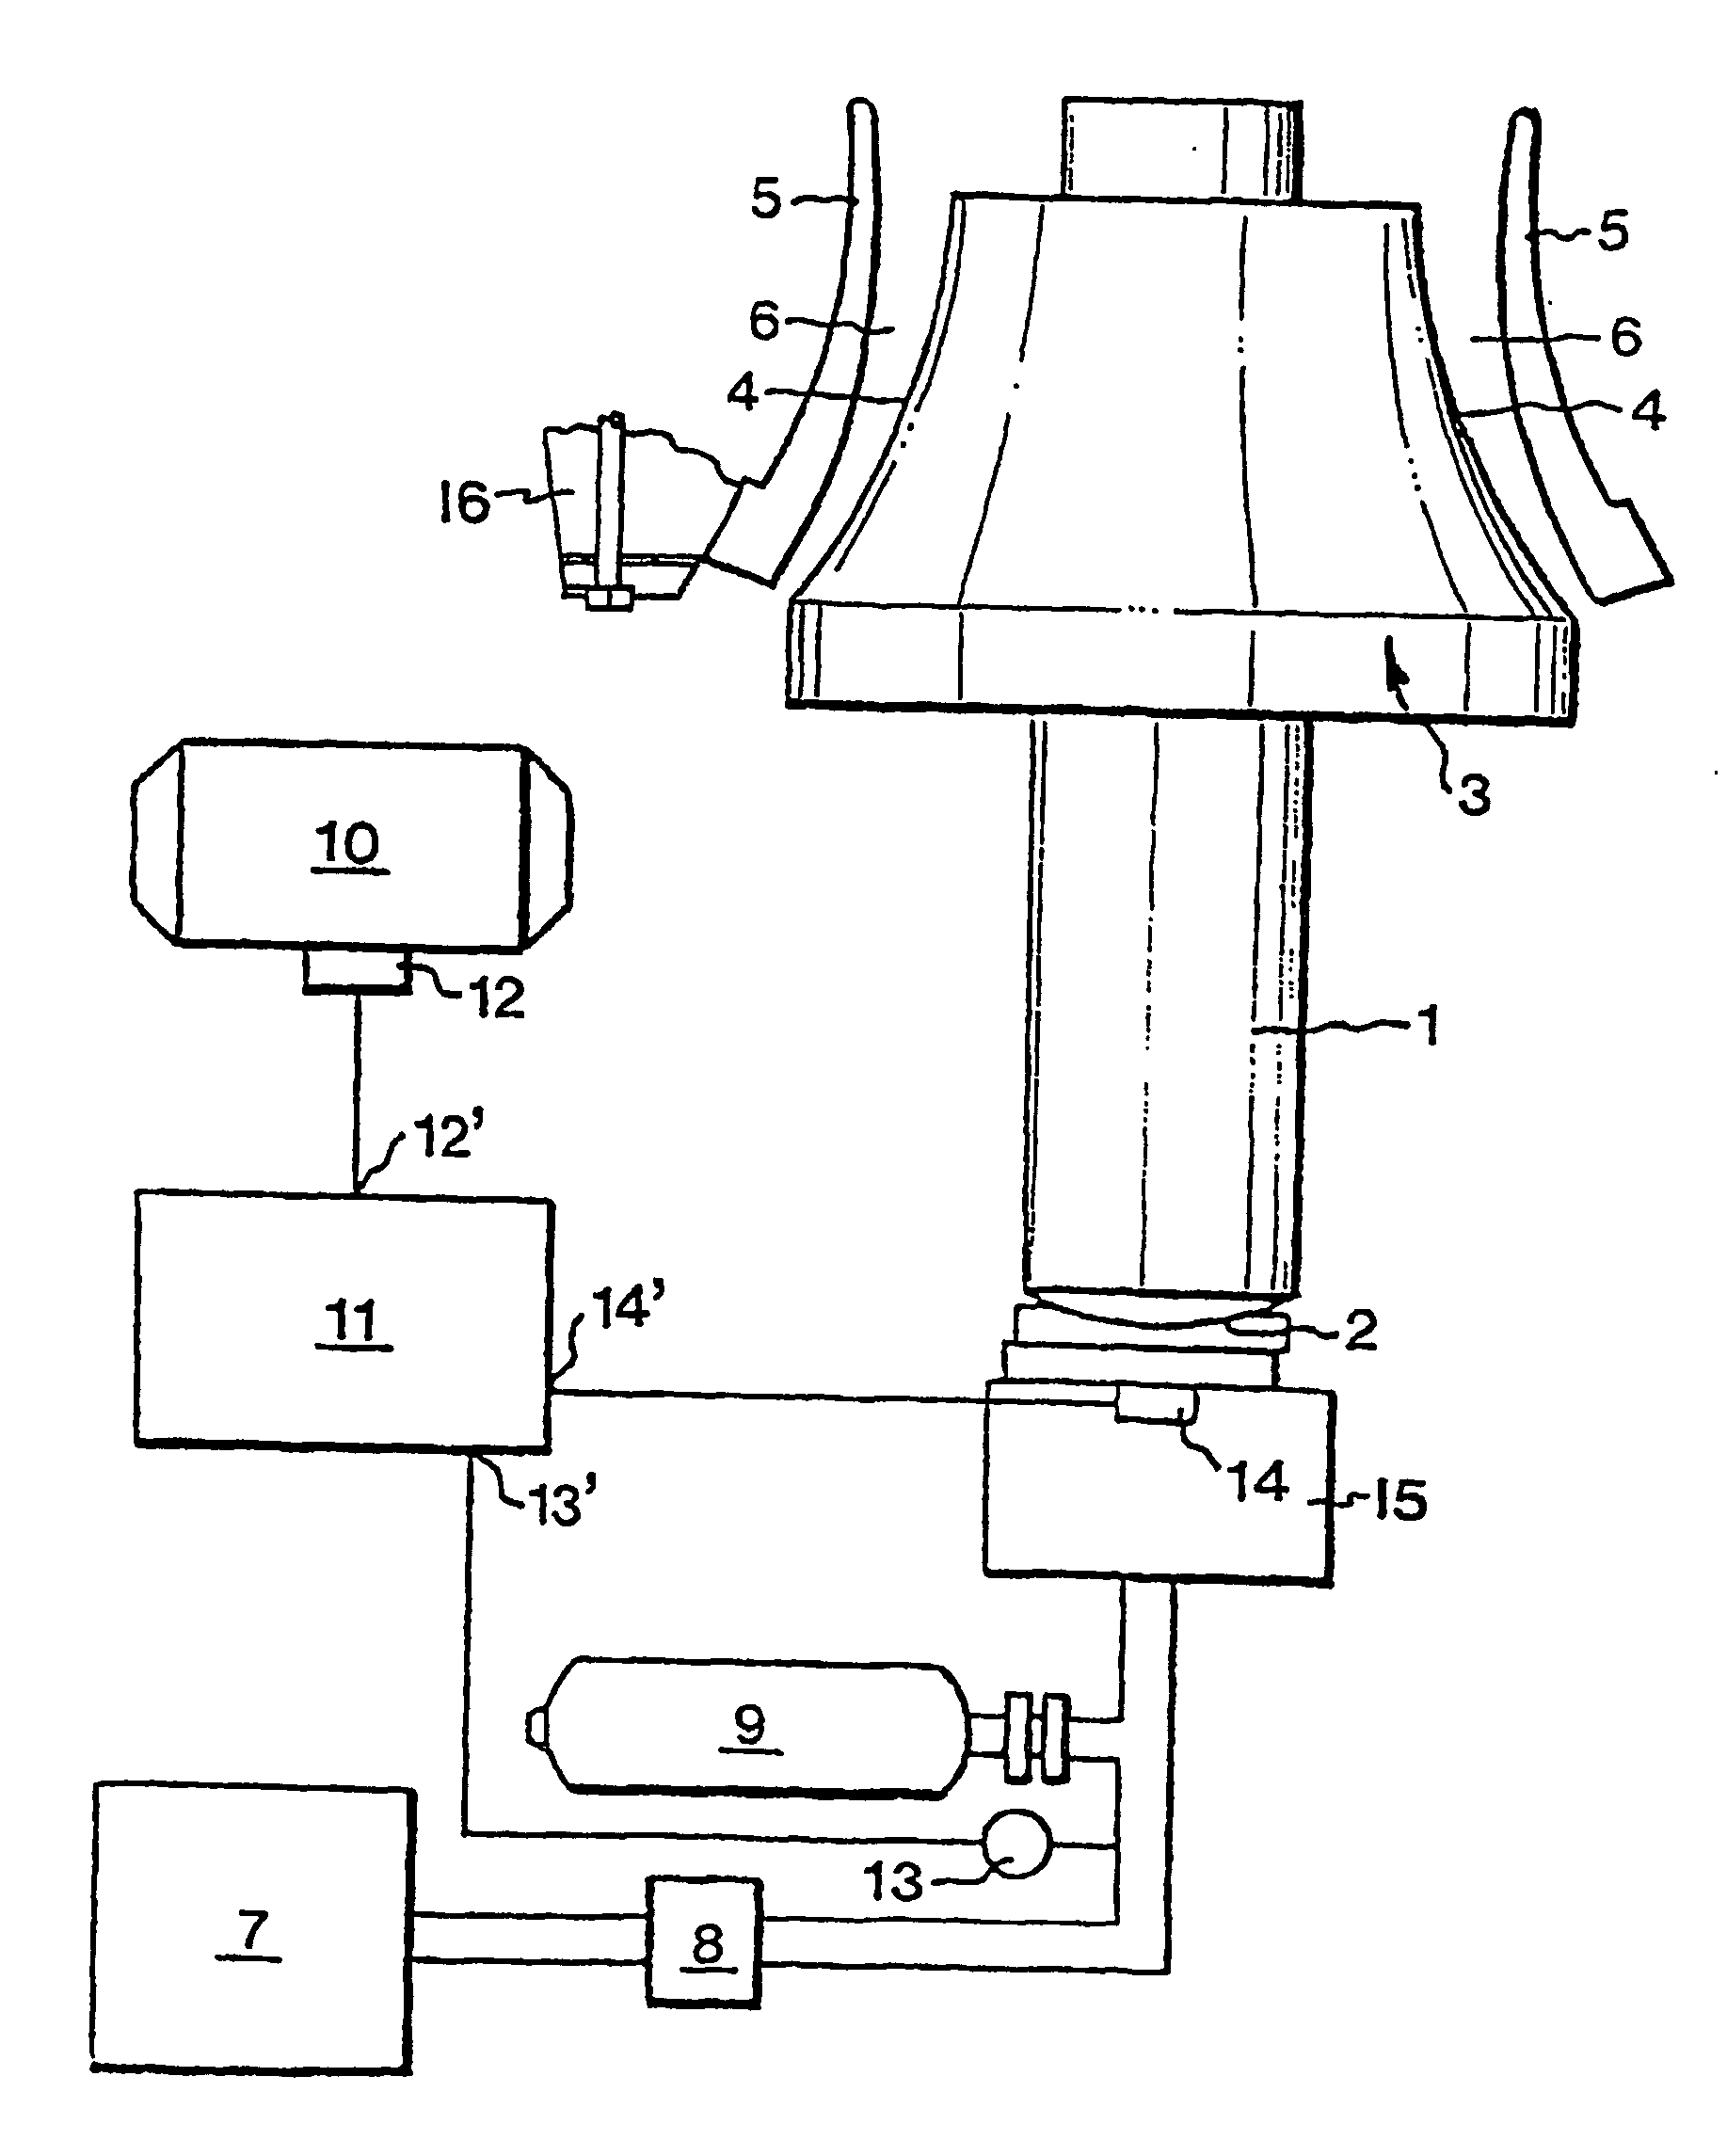 Method and control system for starting crushing in a gyratory crusher